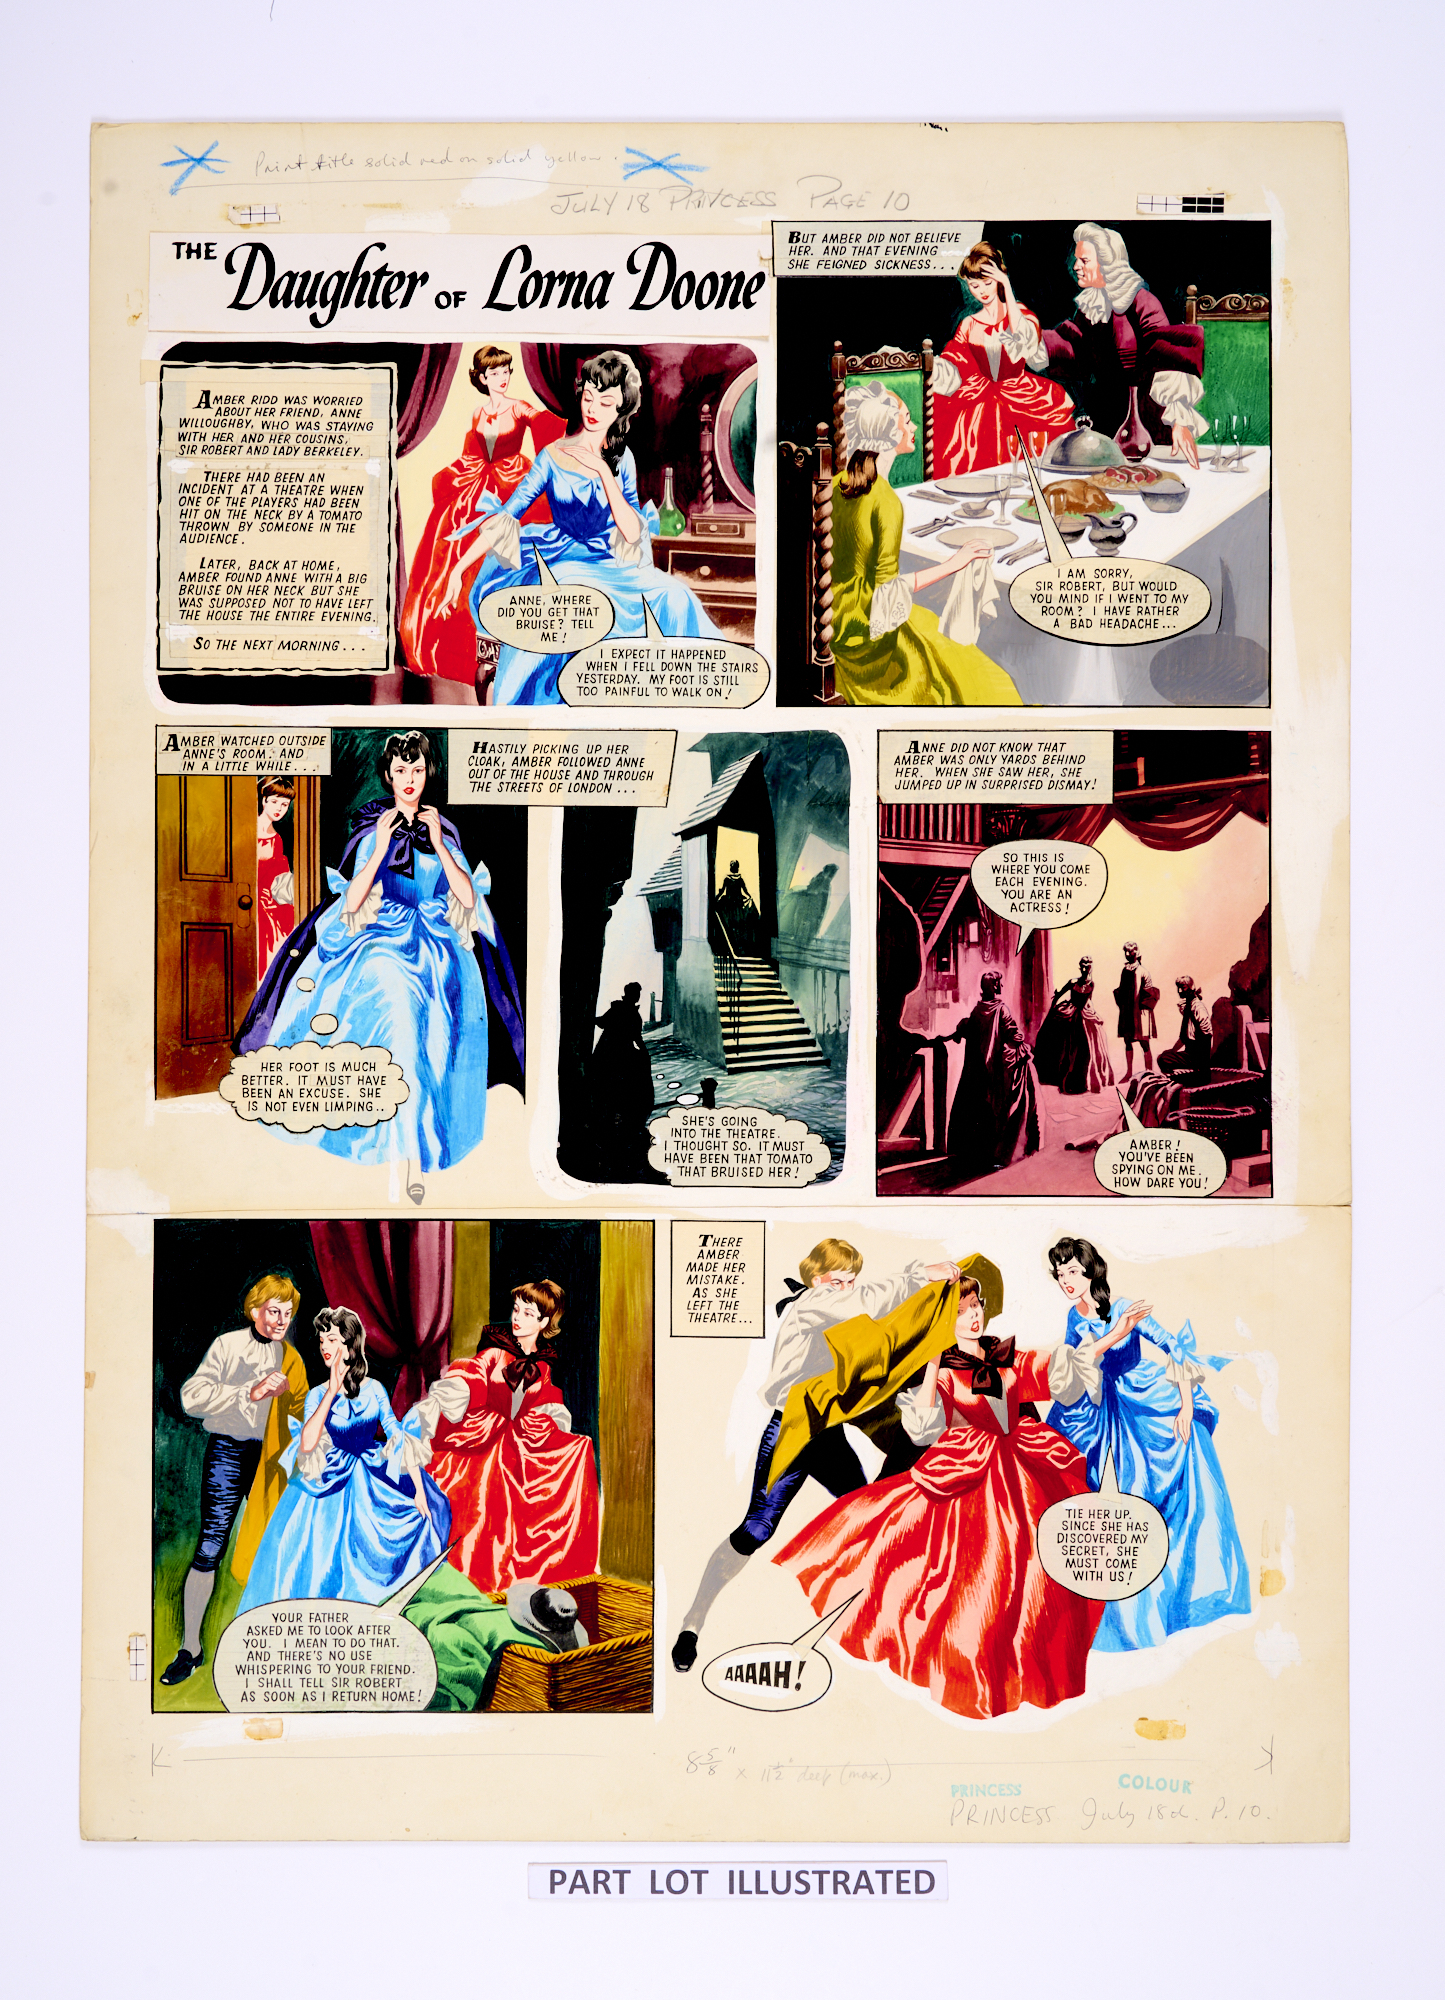 The Daughter of Lorna Doone, 2 consecutive original colour artworks for Princess Magazine (early